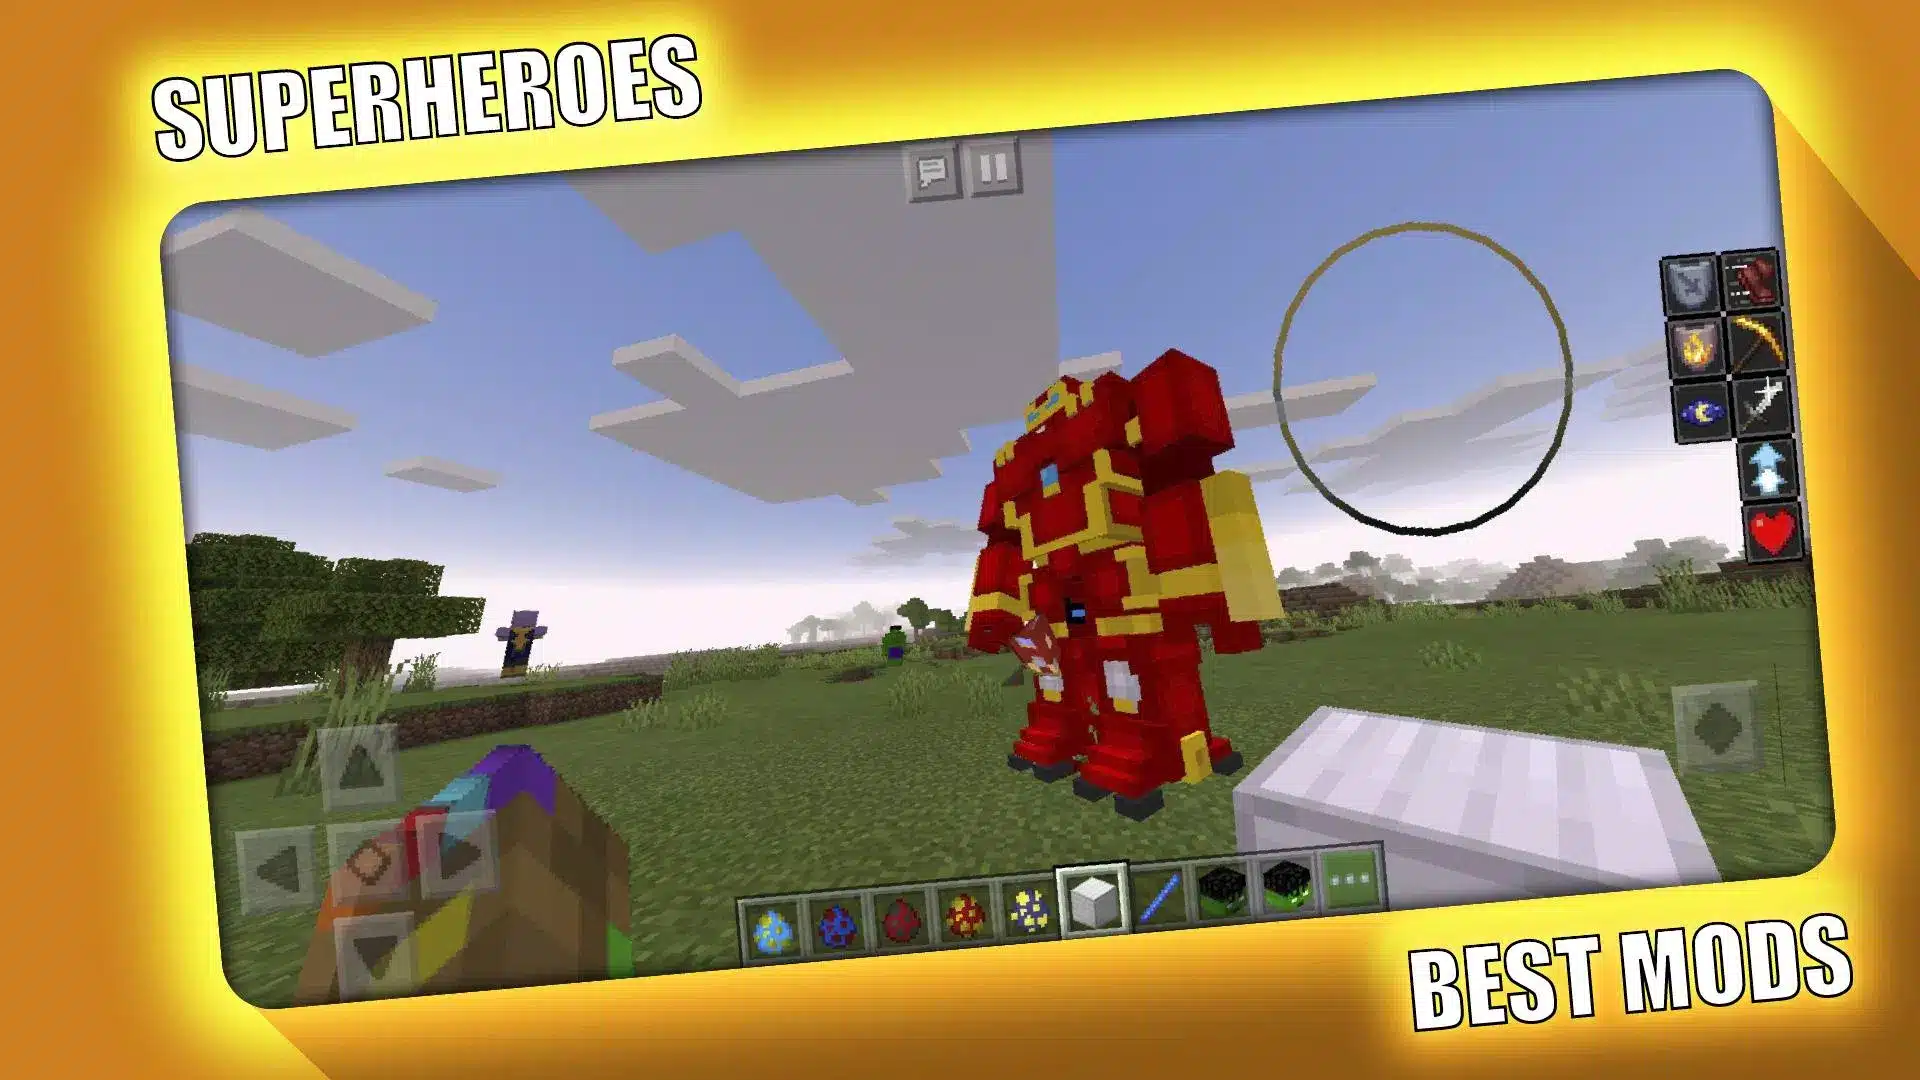 Superheroes Mod for Minecraft Image 1